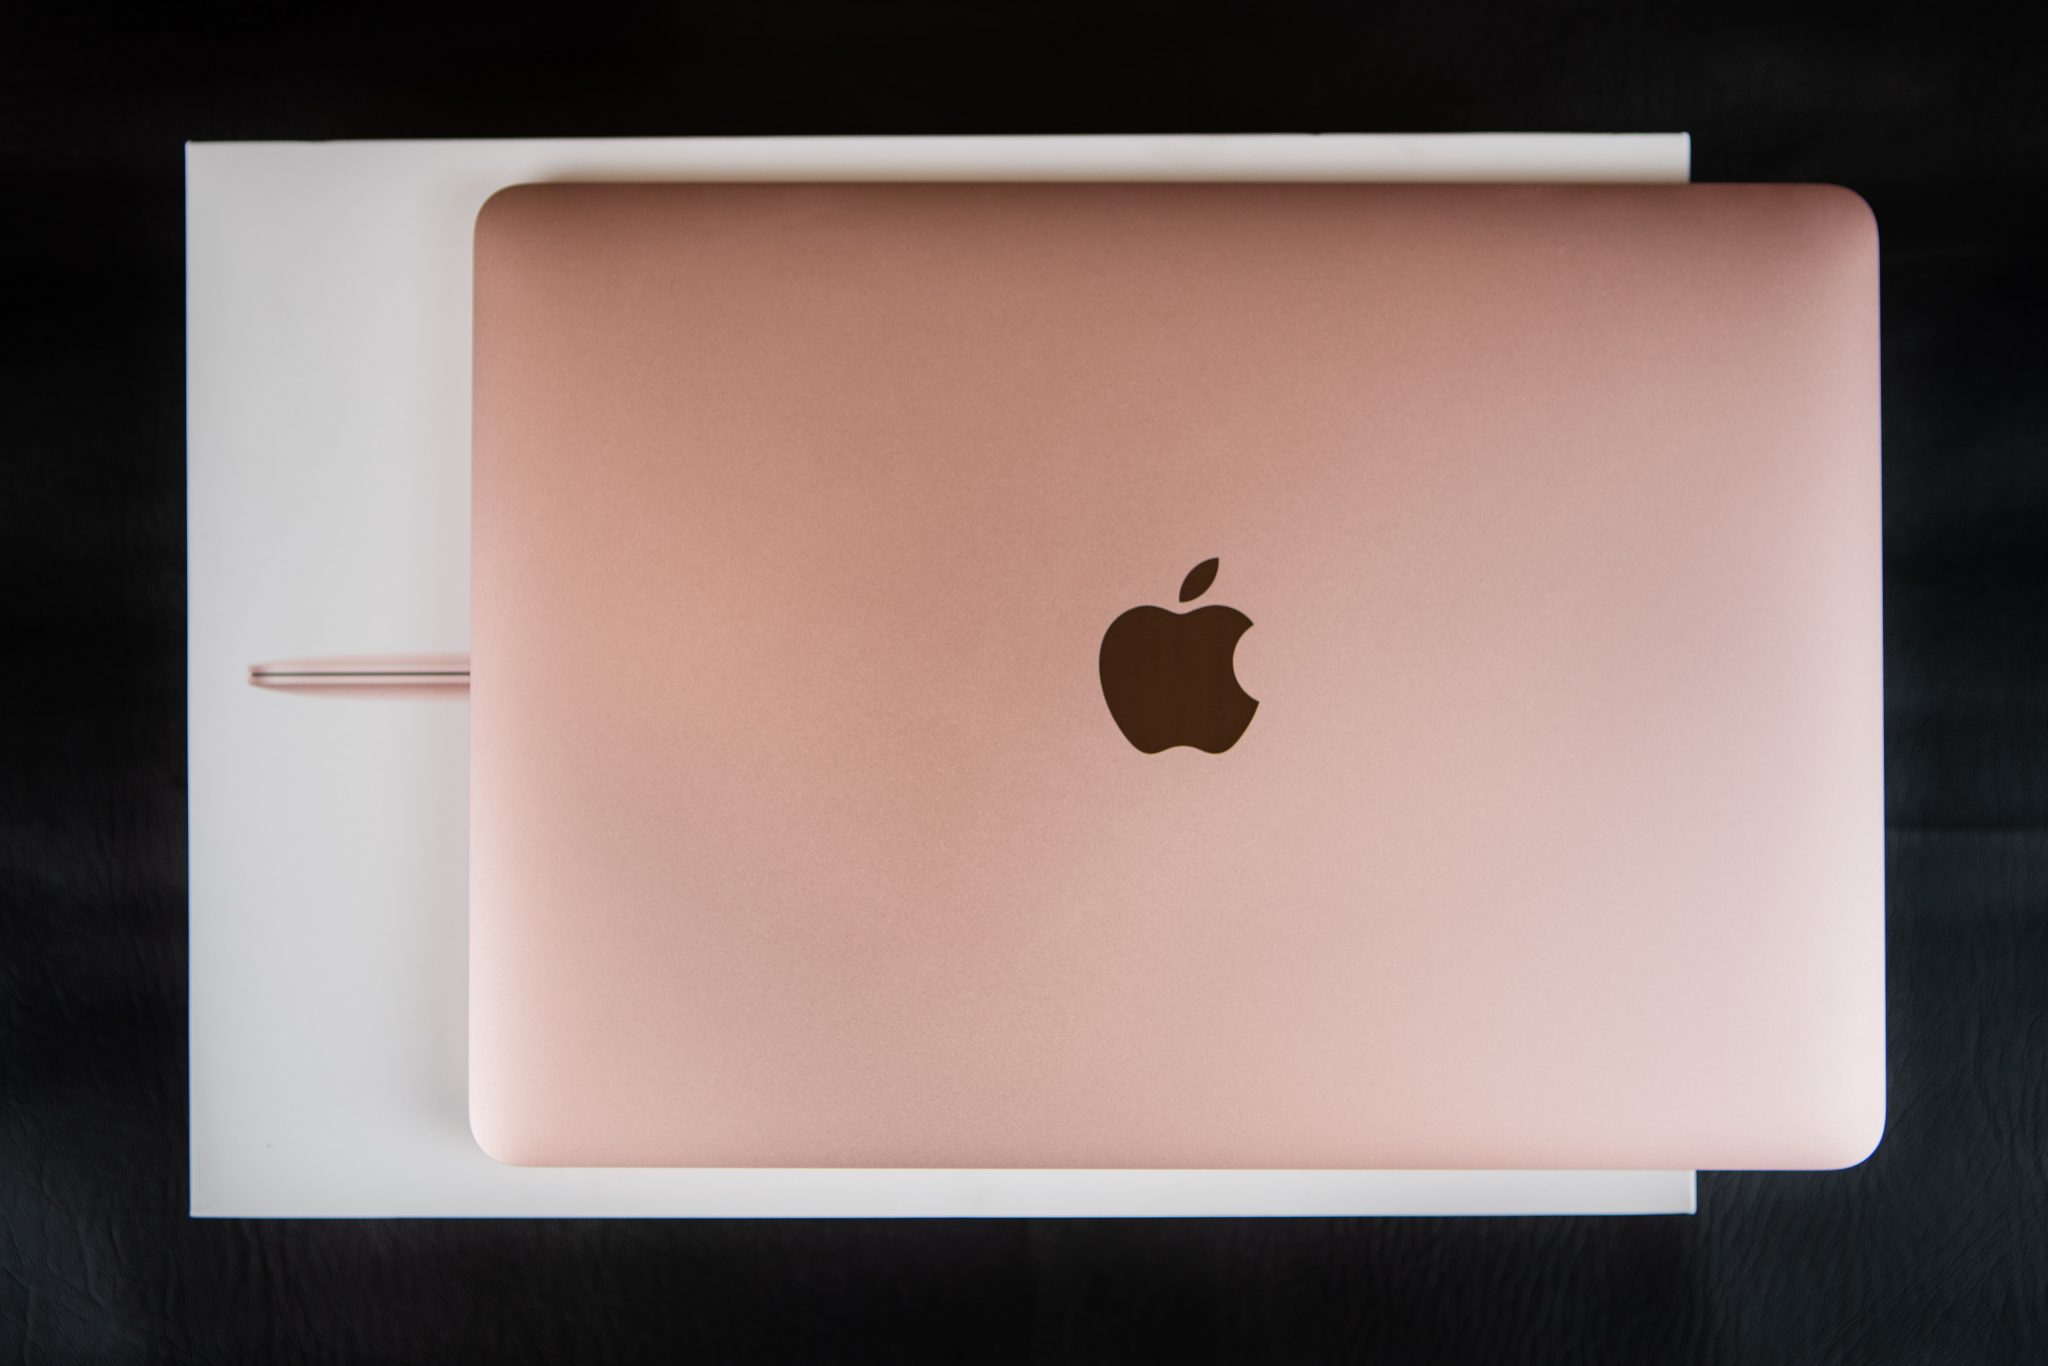 Commercial photo of a colourful Apple MacBook